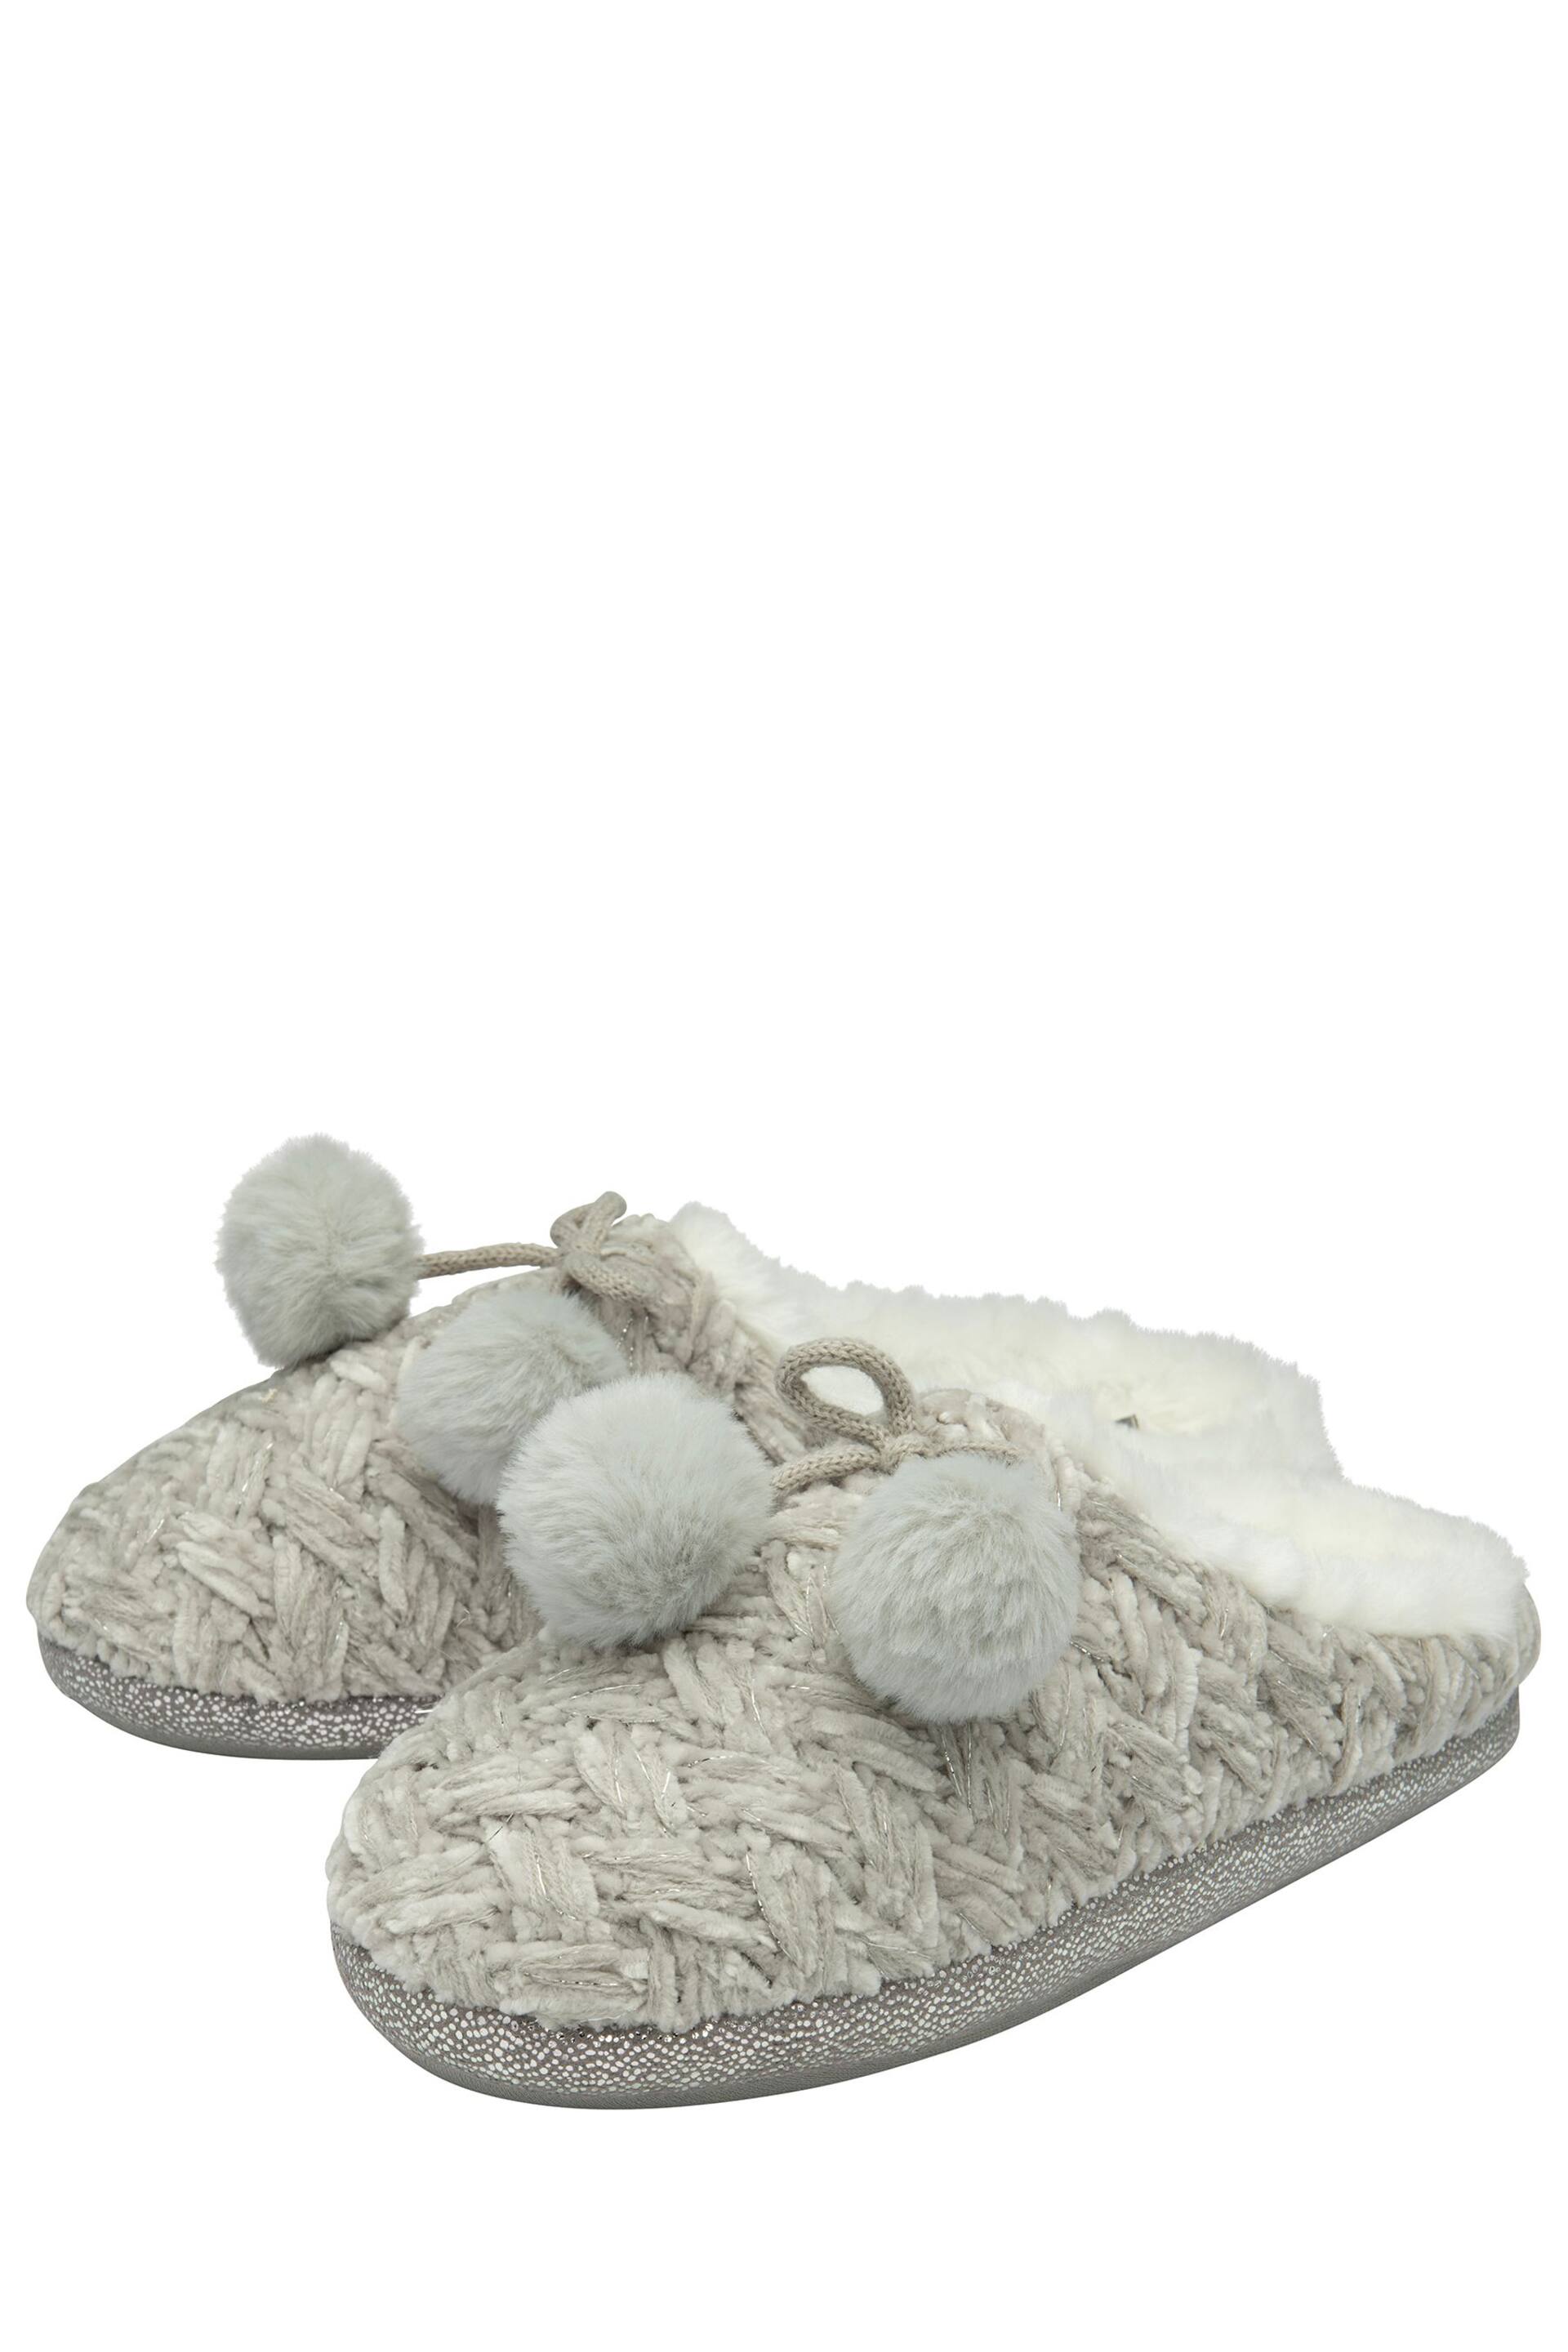 Dunlop Grey Ladies Knitted Closed Toe Mule Slippers - Image 2 of 4